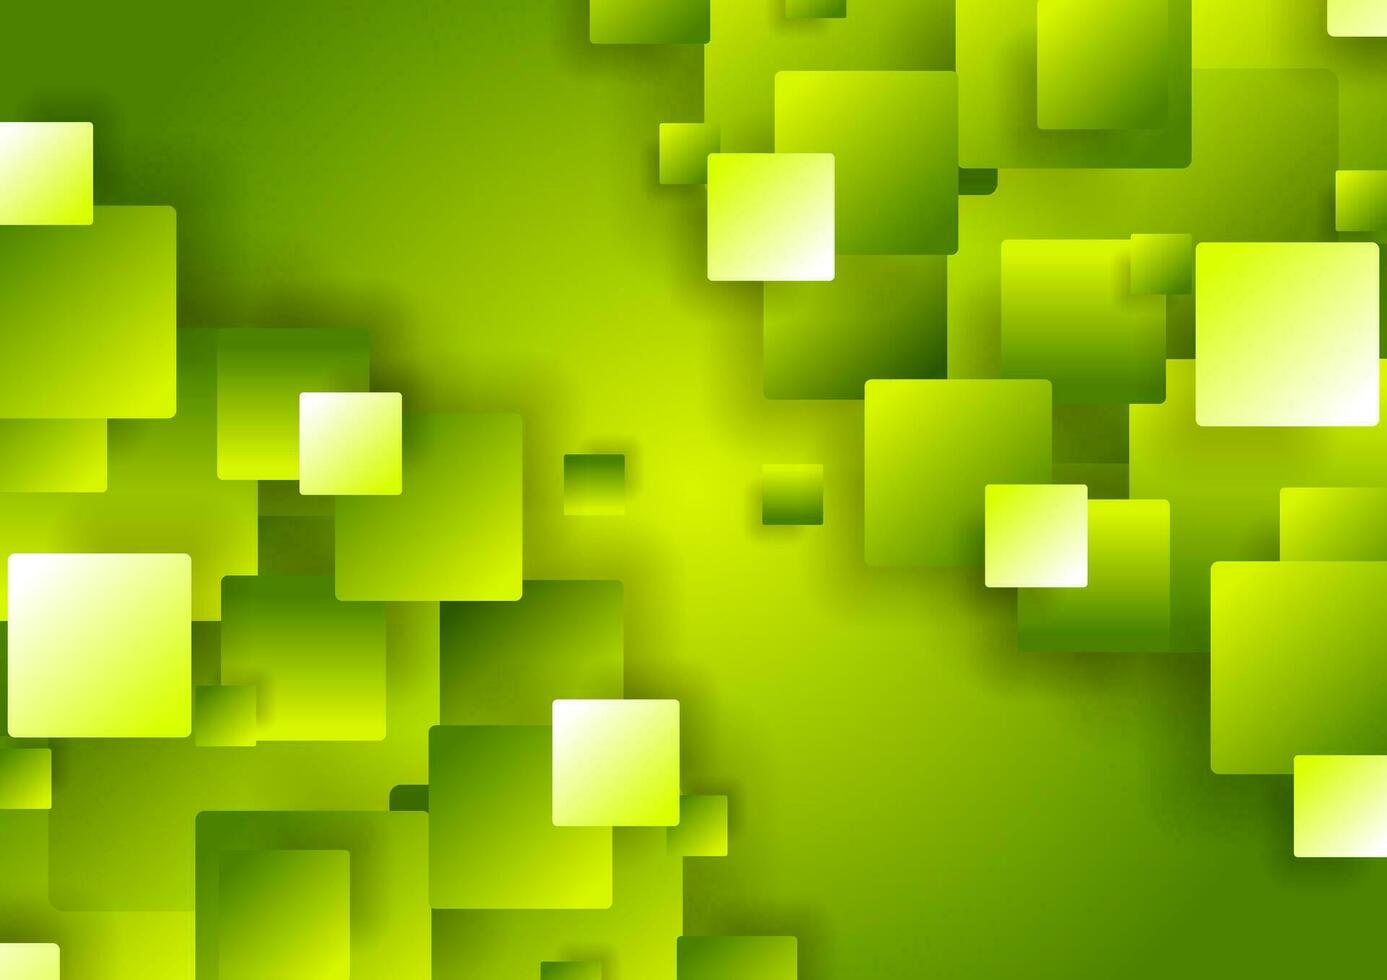 Bright green abstract tech geometric squares background vector